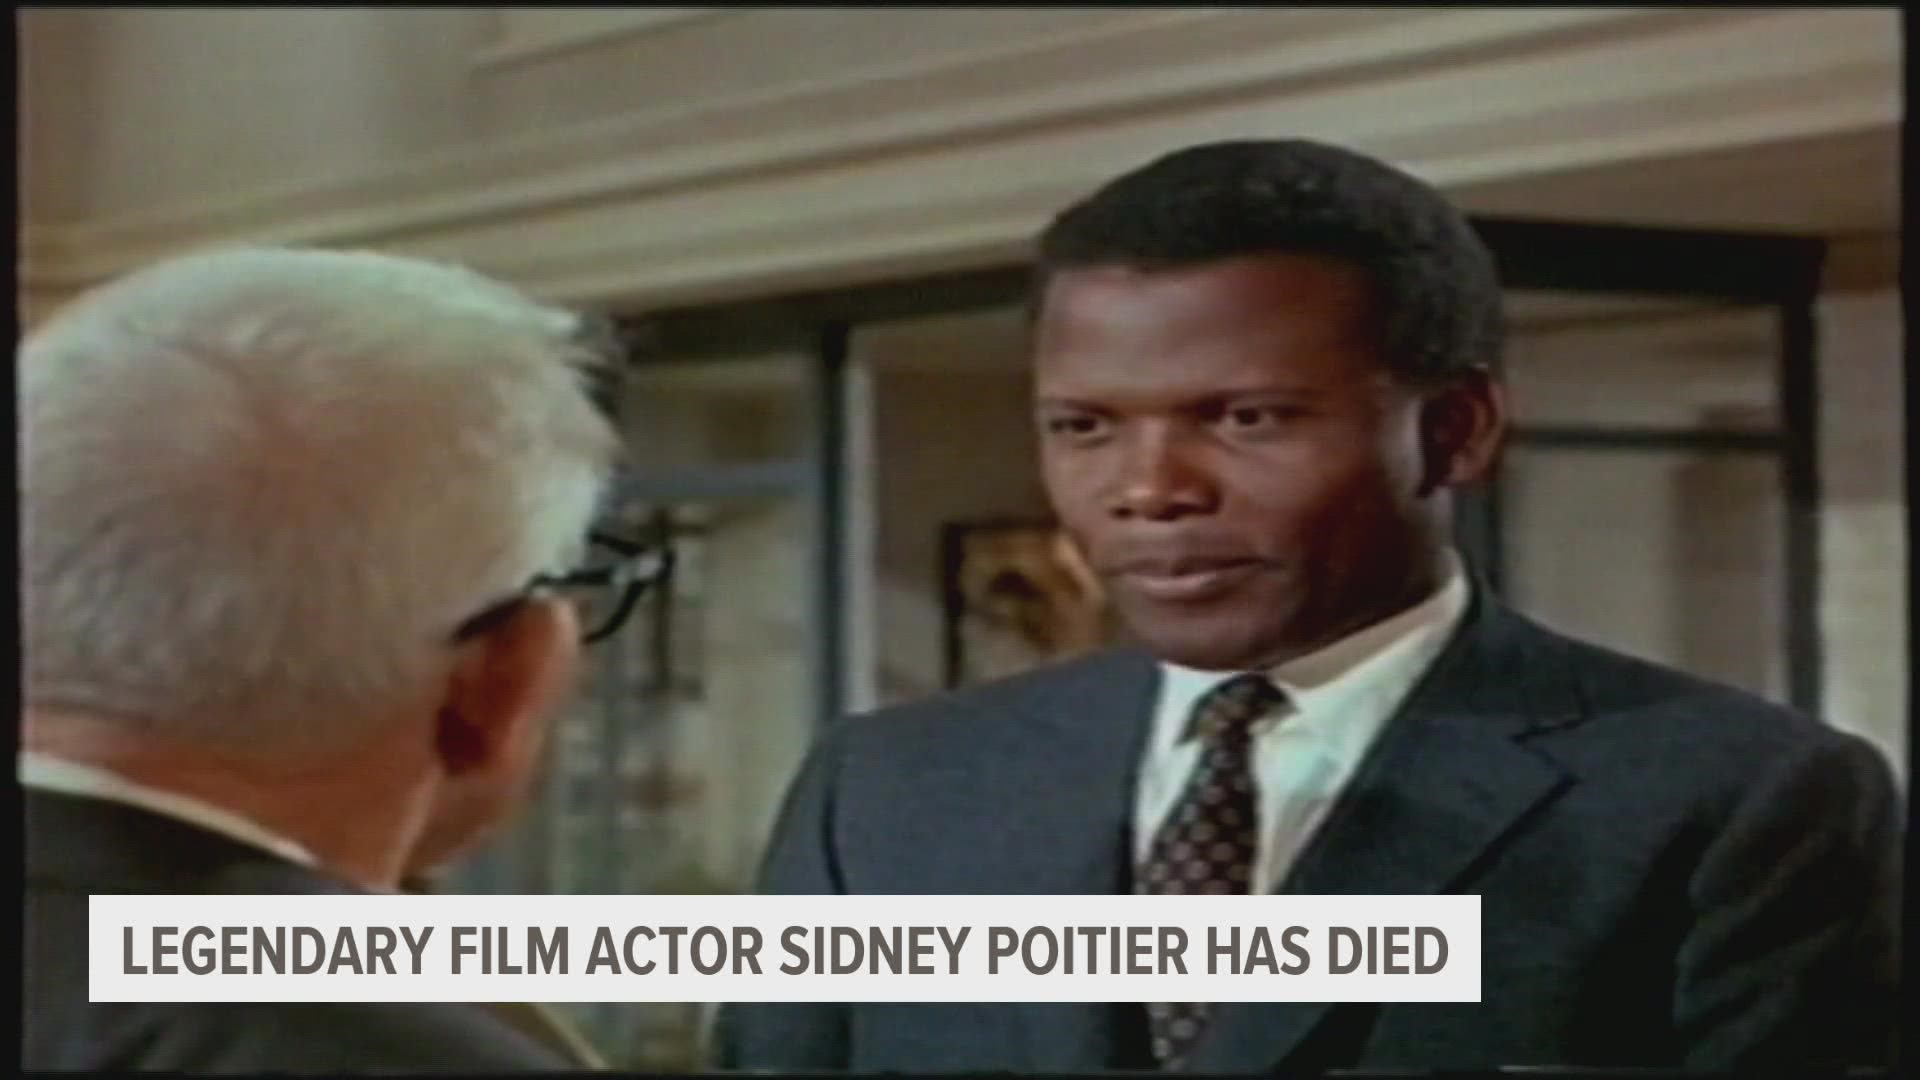 In 1964, Sidney Poitier made history when he won the Academy Award for Best Actor for "Lilies of the Field."